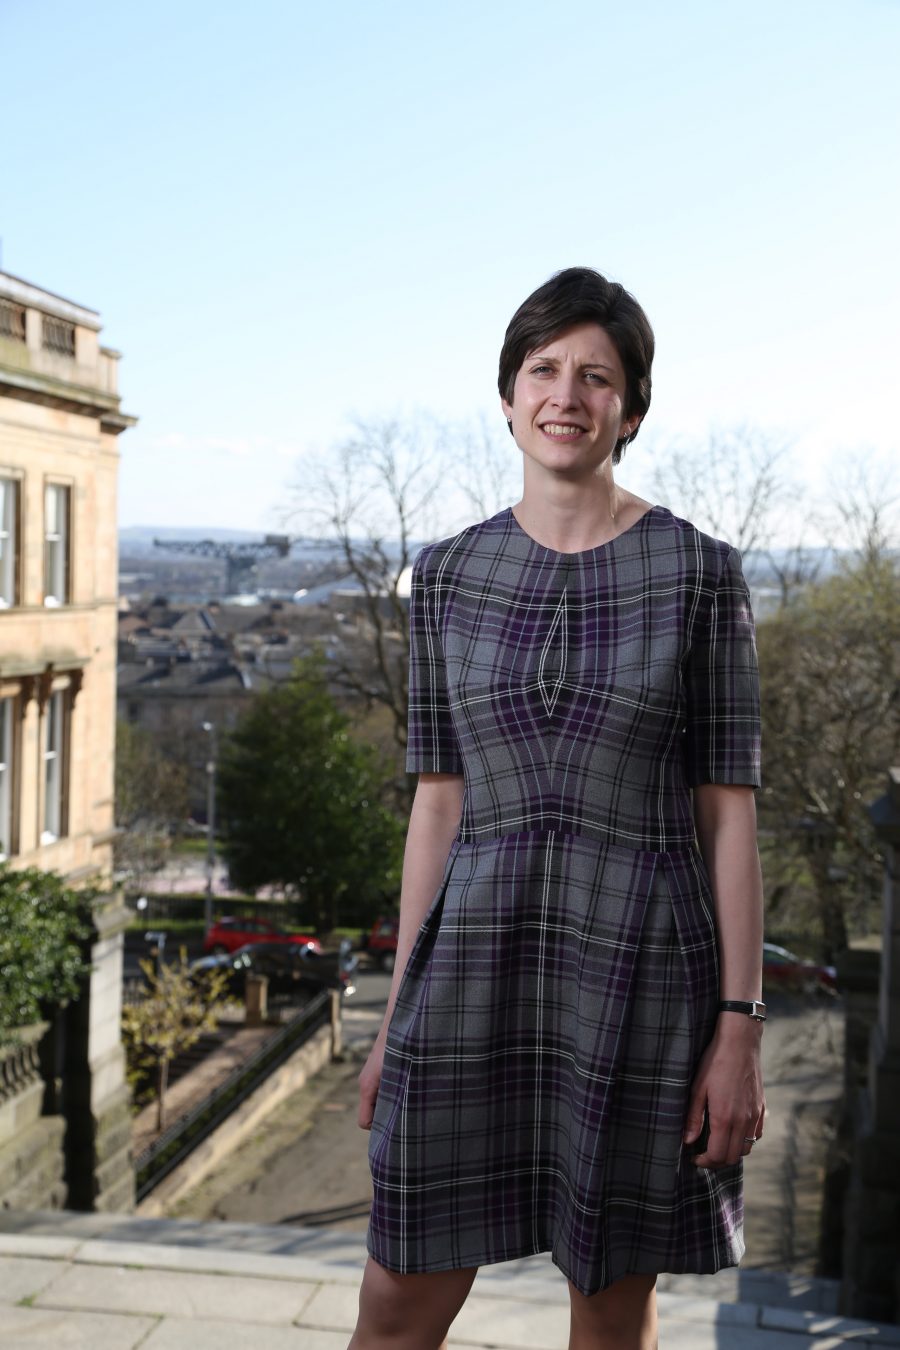 Thewliss challenges Treasury on highly skilled migrants